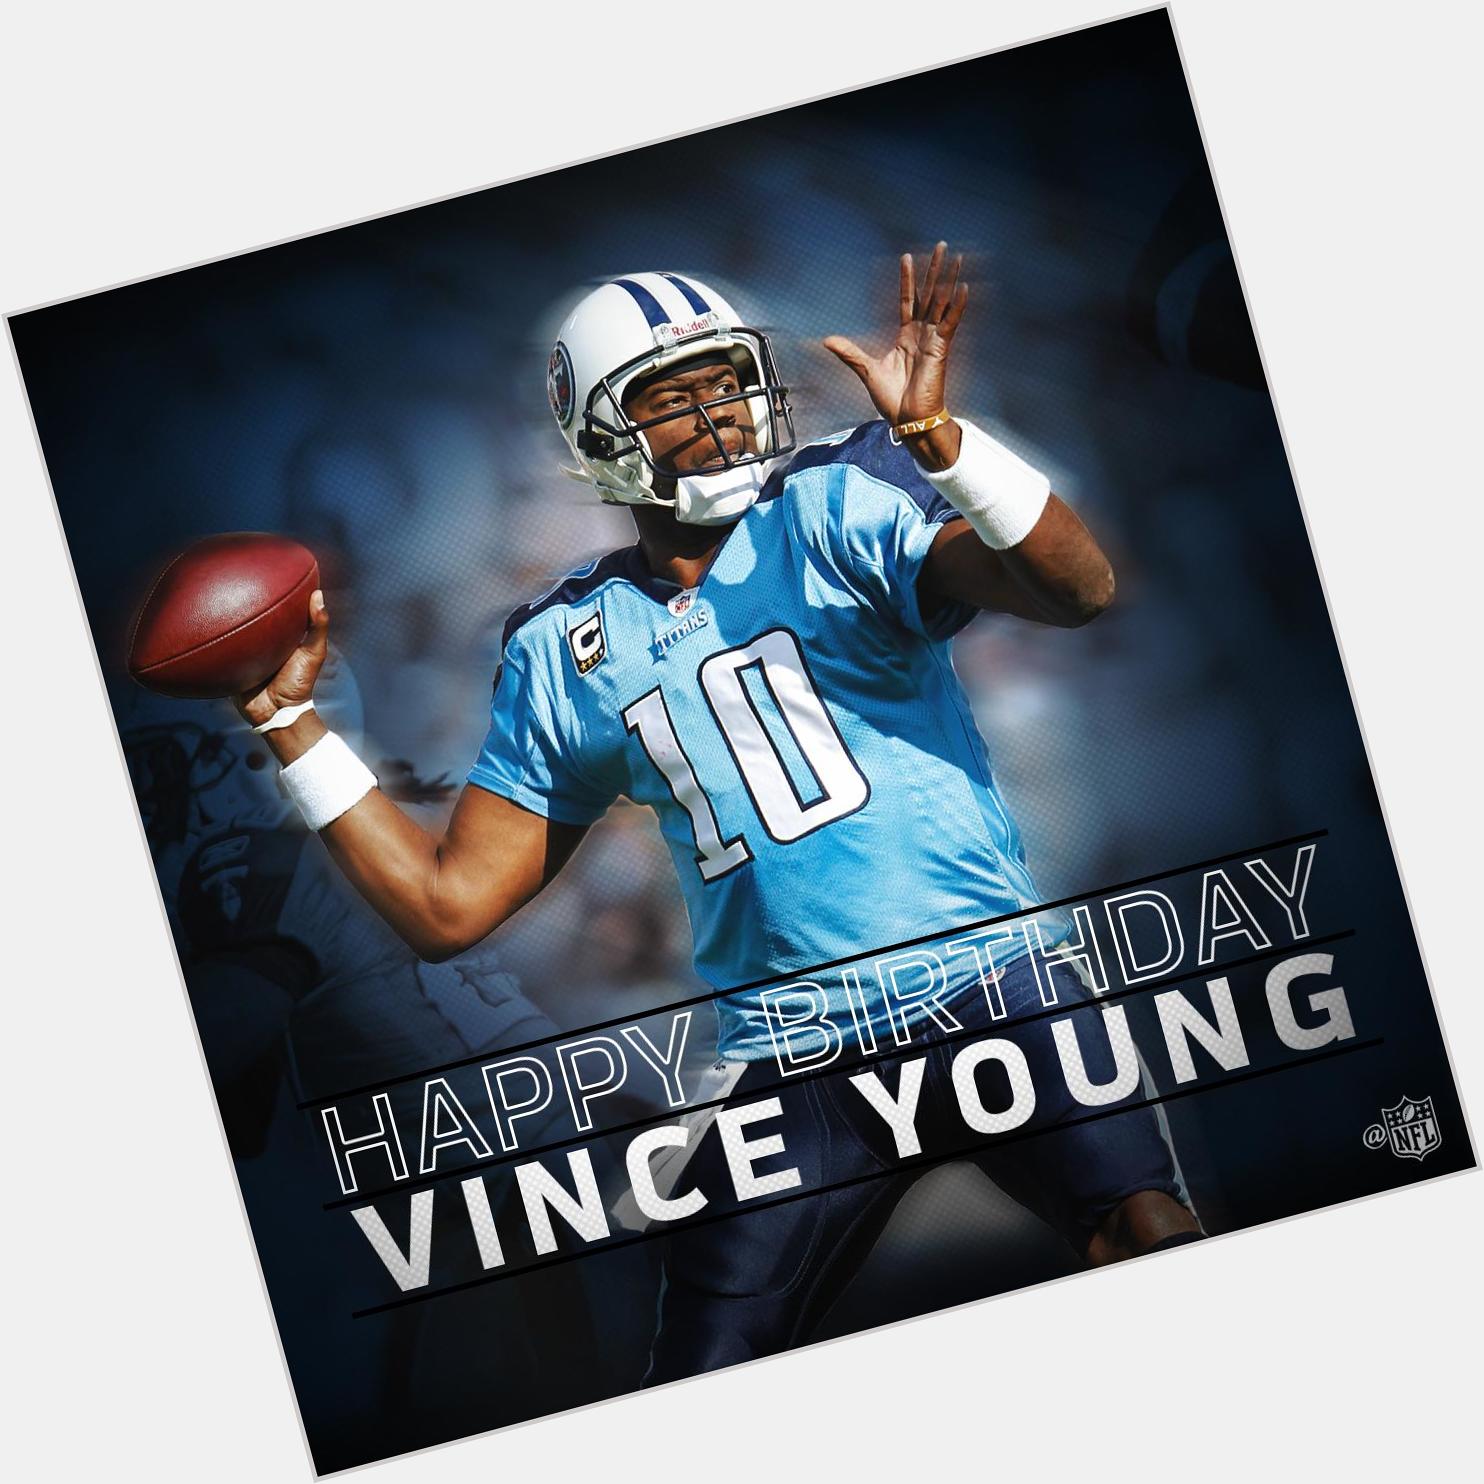 Join us in wishing Vince Young a Happy 34th Birthday! 